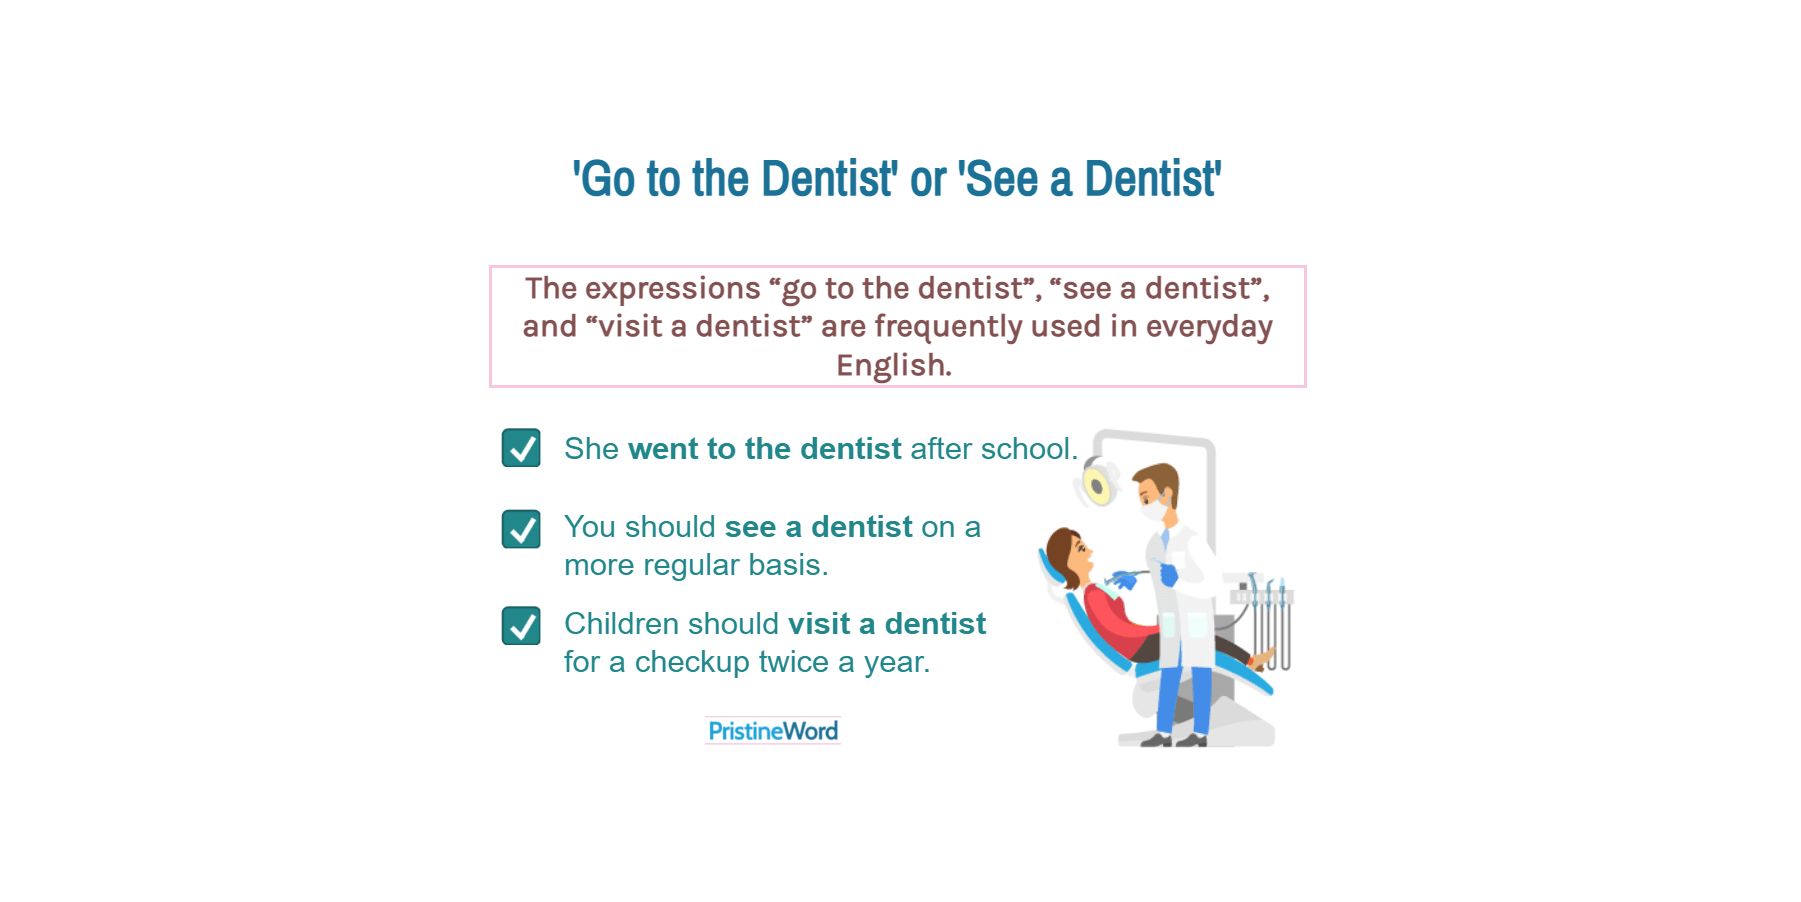 'Go to the Dentist' or 'See a Dentist'